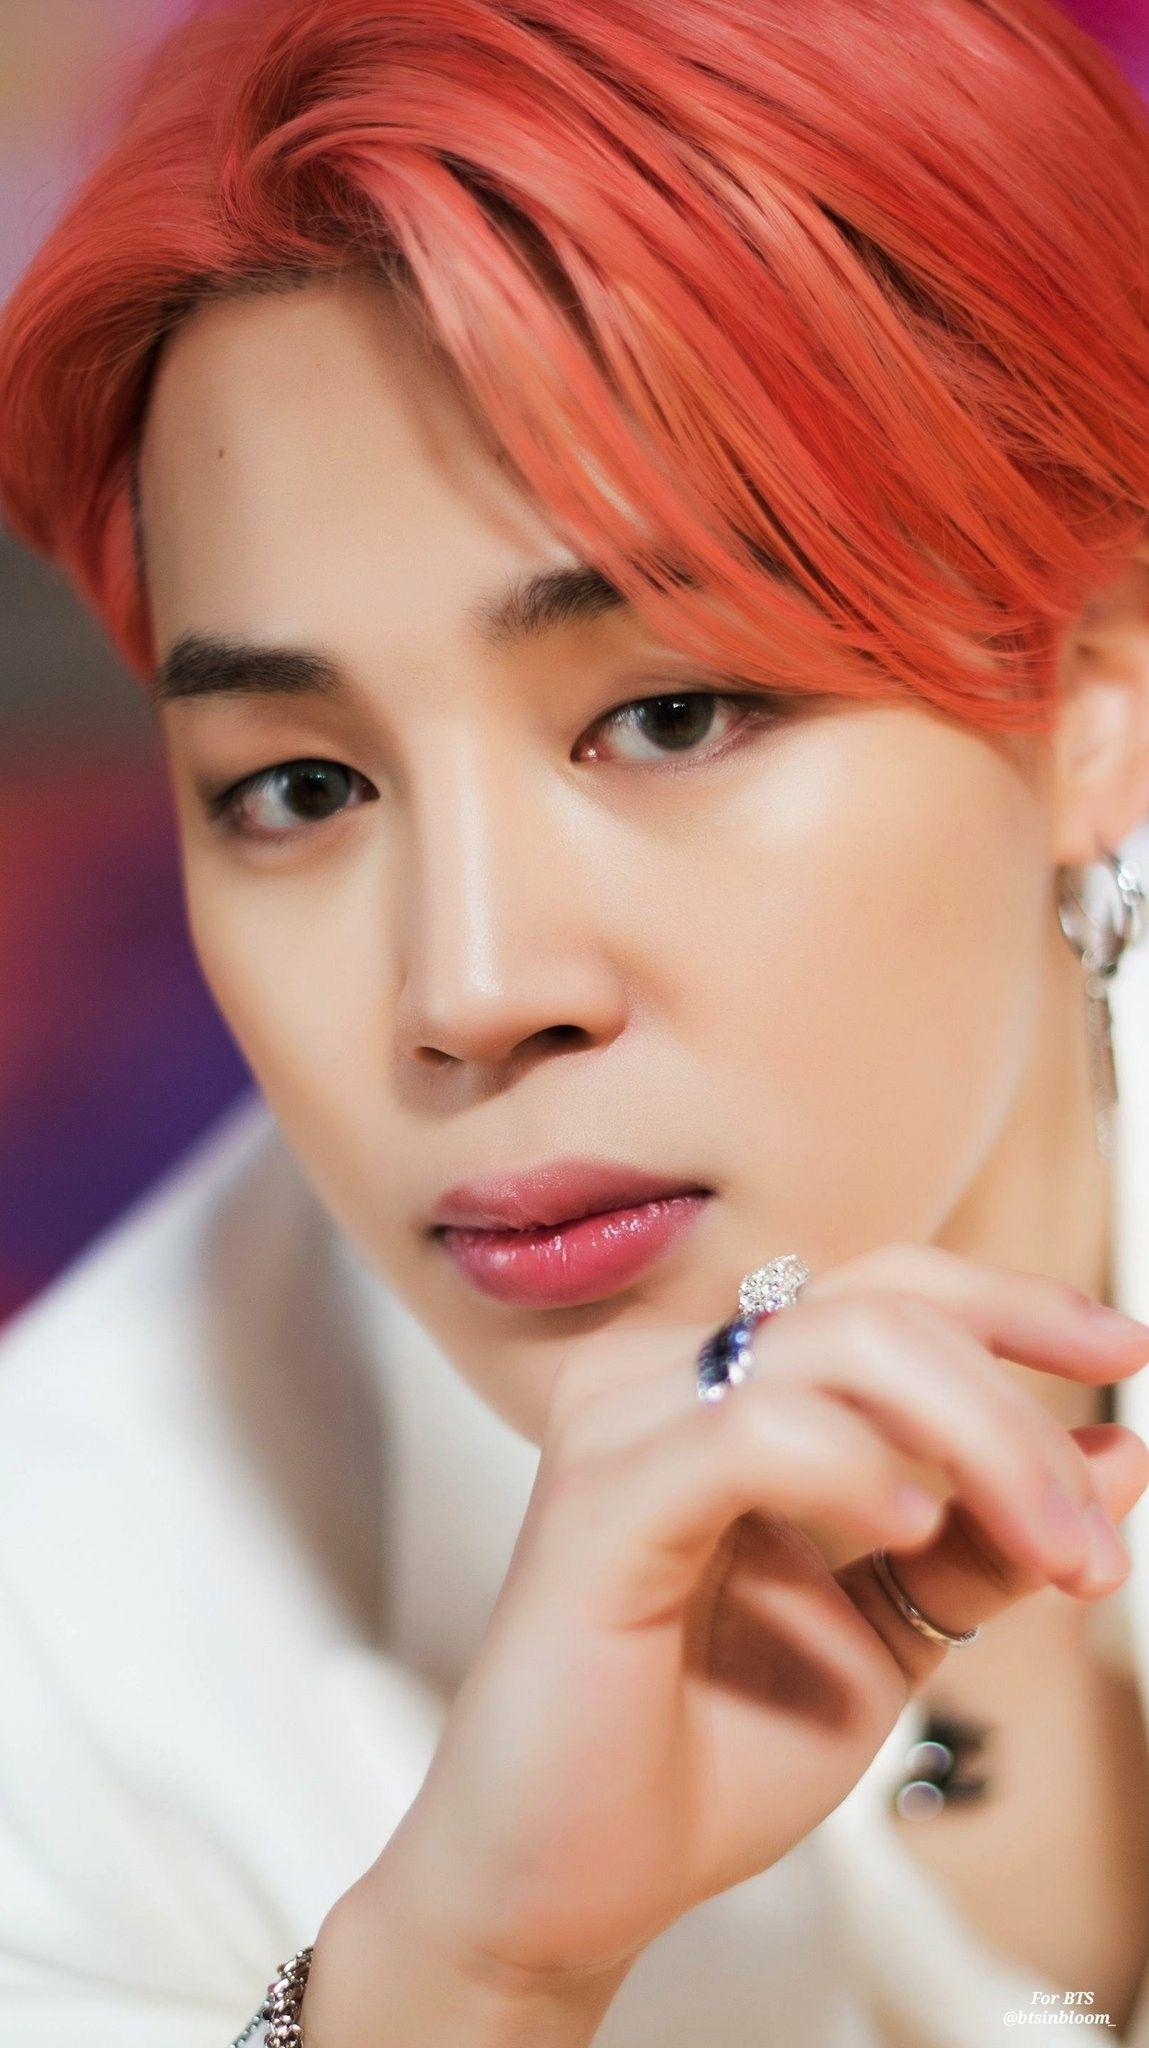 NAVER x Dispatch HD #JIMIN 'Boy With Luv' WALLPAPERS ♡. BTS